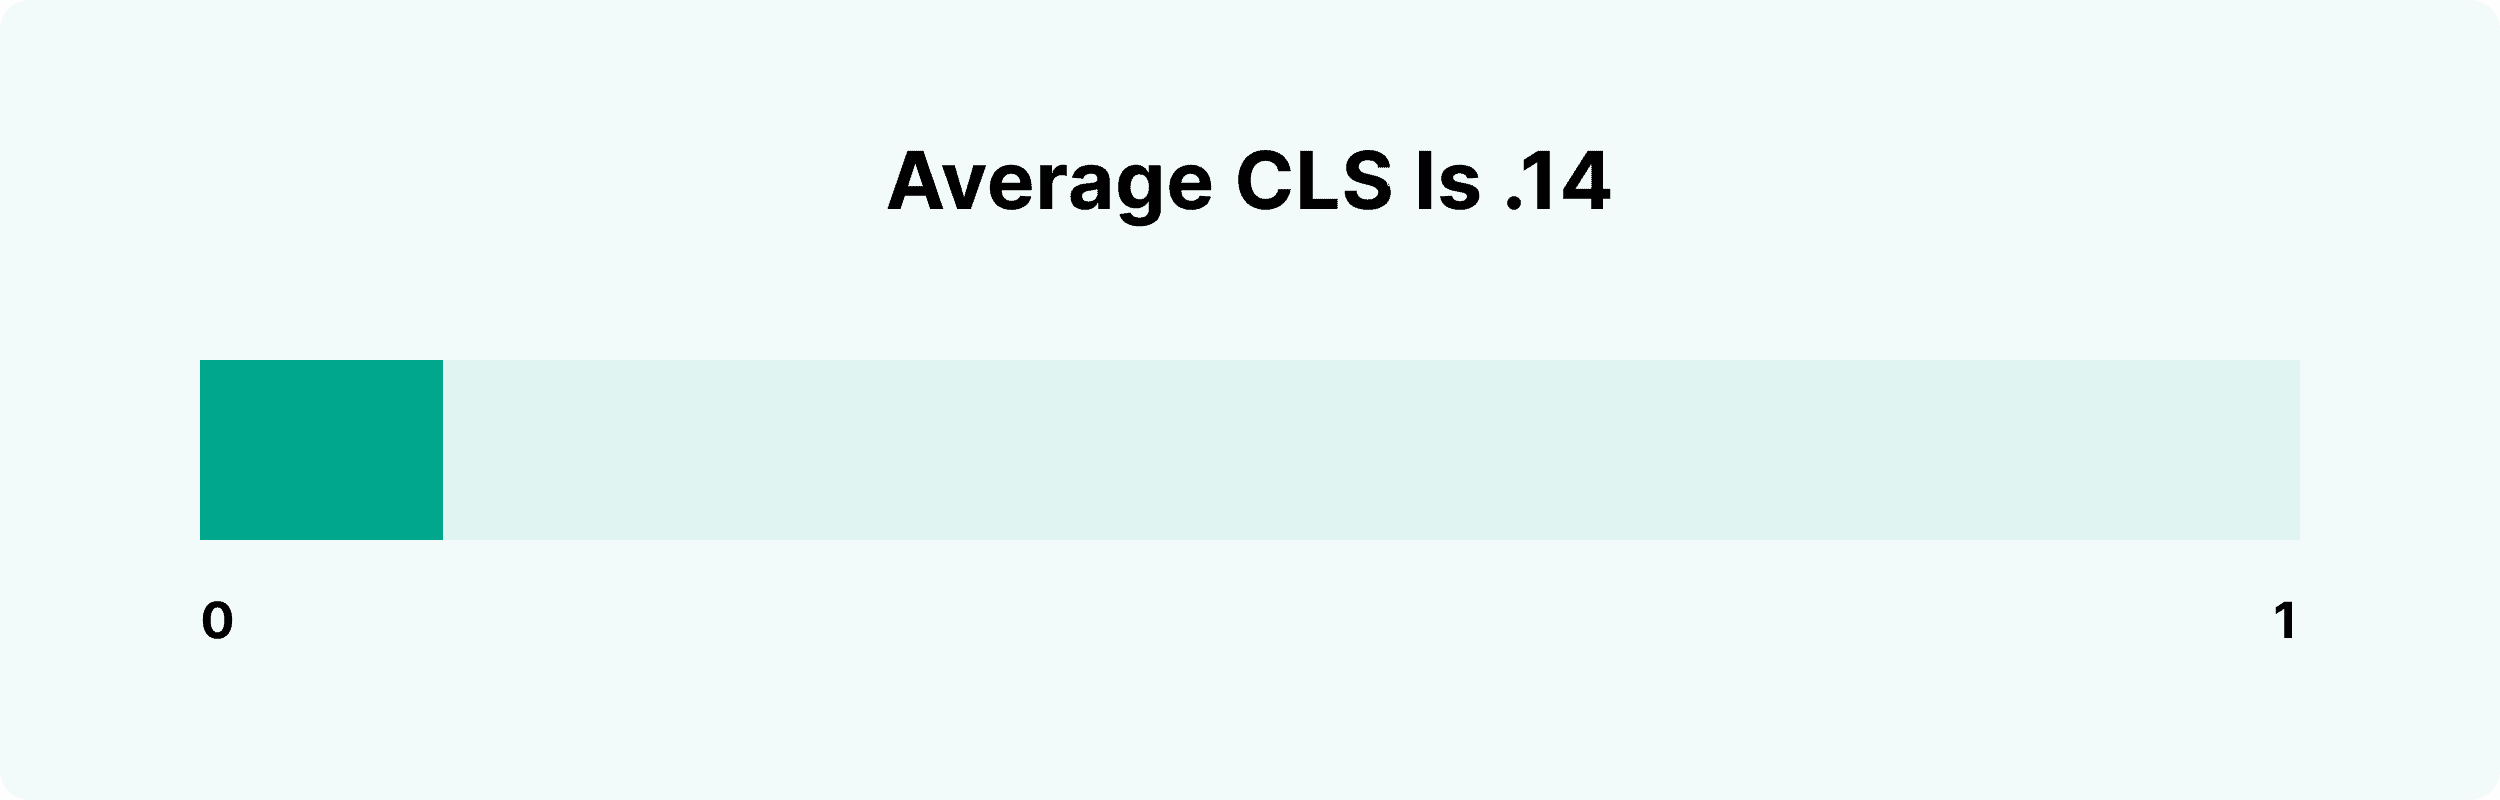 Average CLS is .14